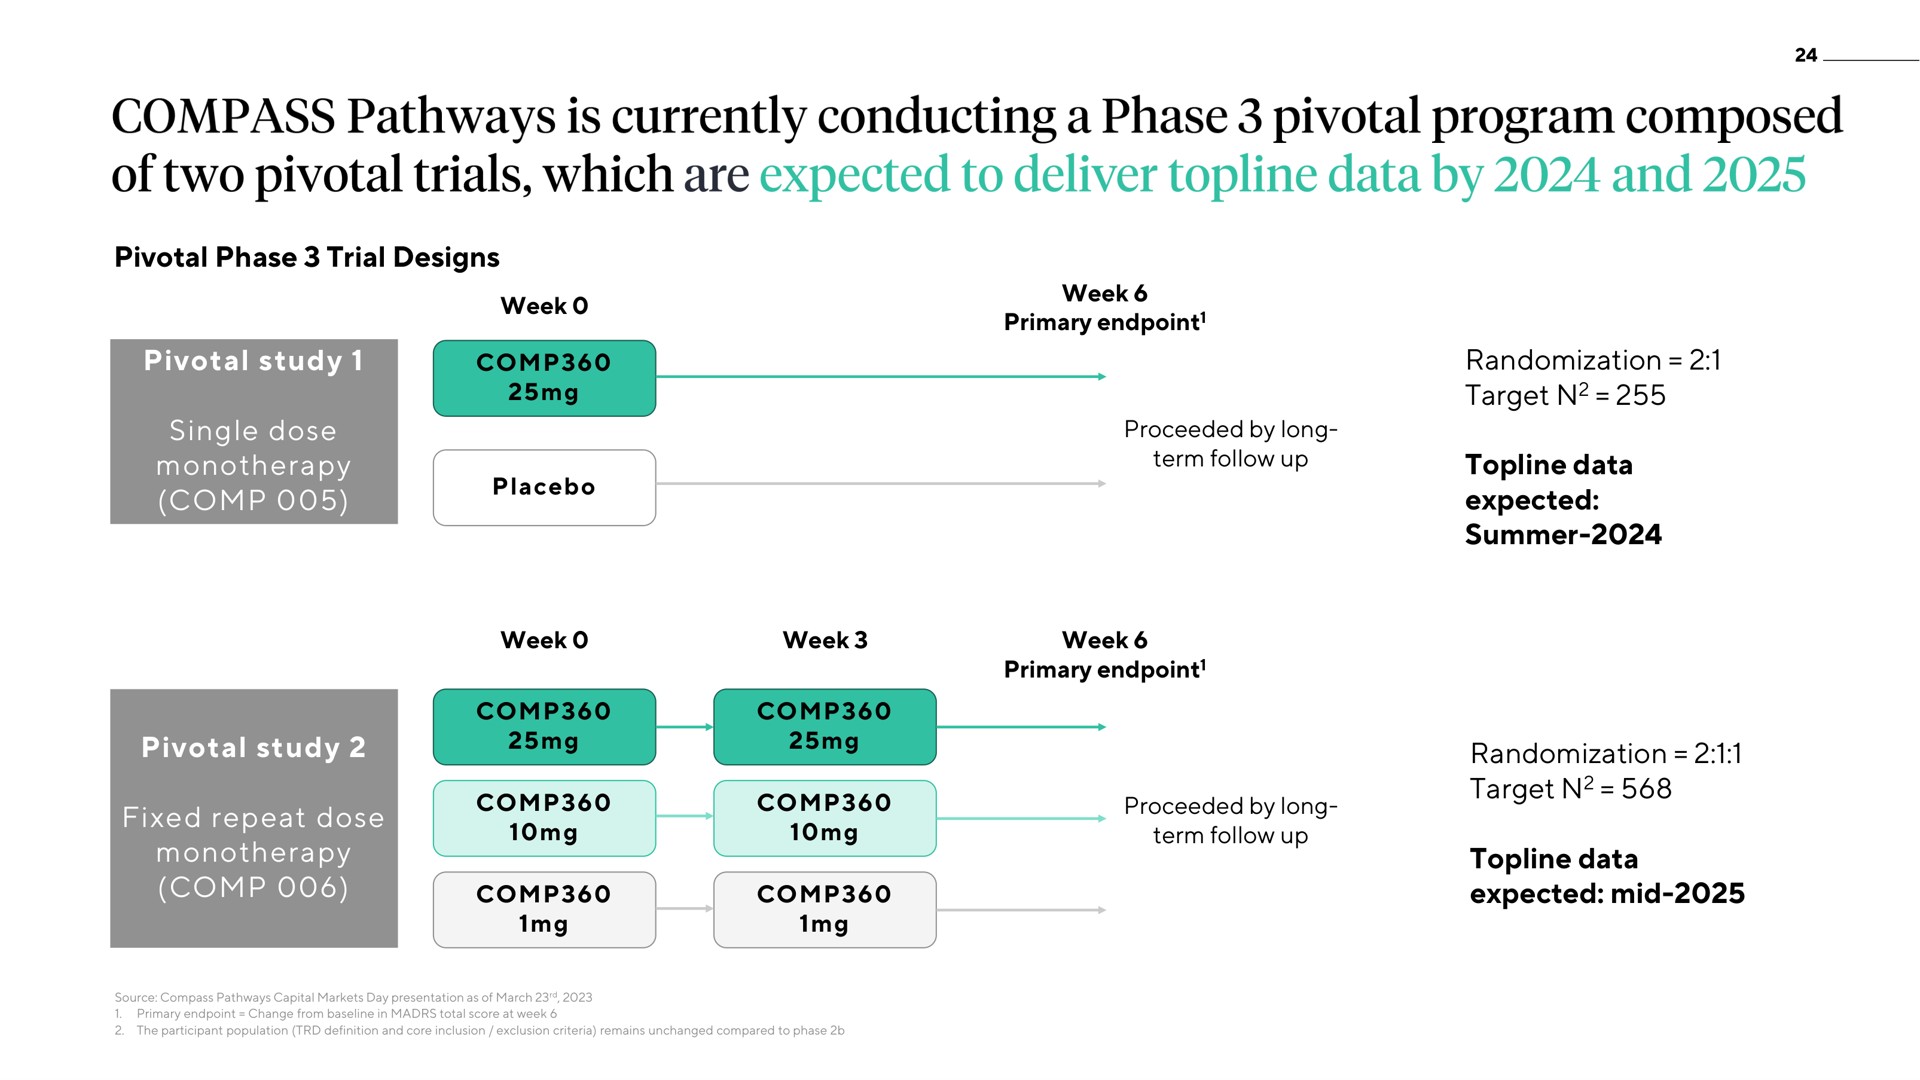 pivotal phase trial designs pivotal study single dose randomization target topline data expected summer pivotal study fixed repeat dose randomization target topline data expected mid compass pathways is currently conducting a program composed of two trials which are to deliver by and | ATAI